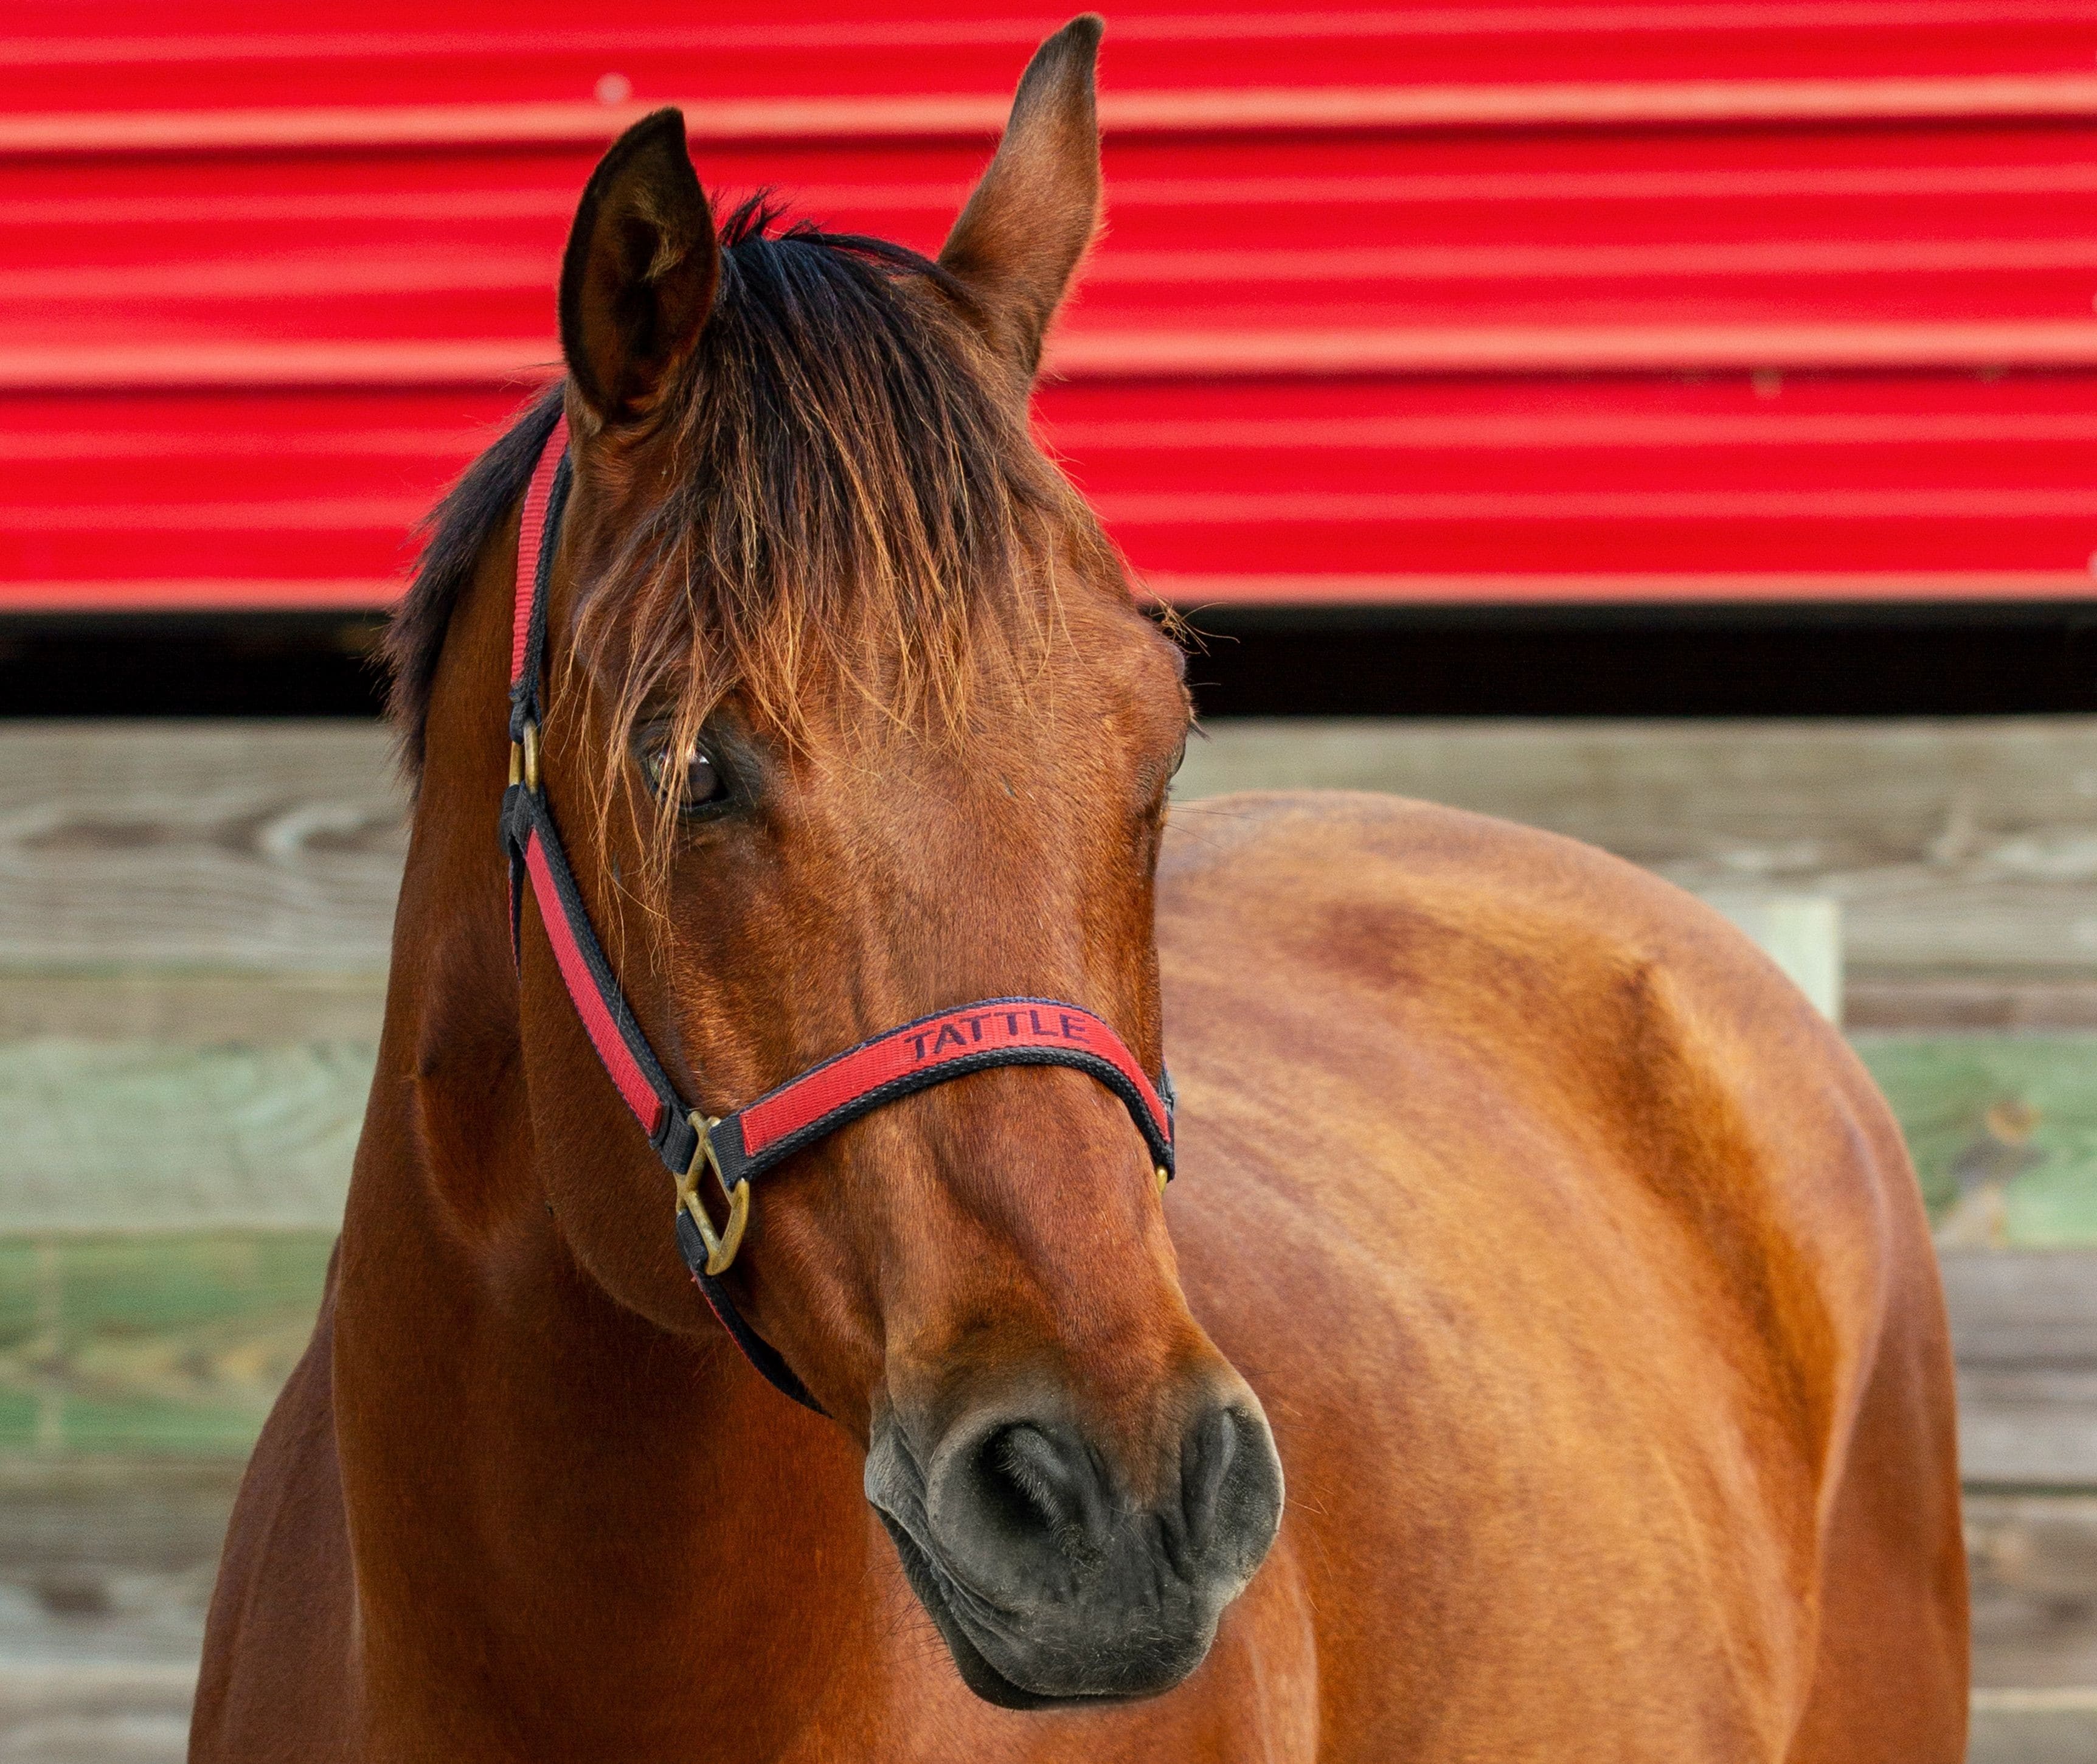 Tattle is a lesson horse at J & S Performance Horses. He is a bay gelding, wearing a red and black halter with his name on it.